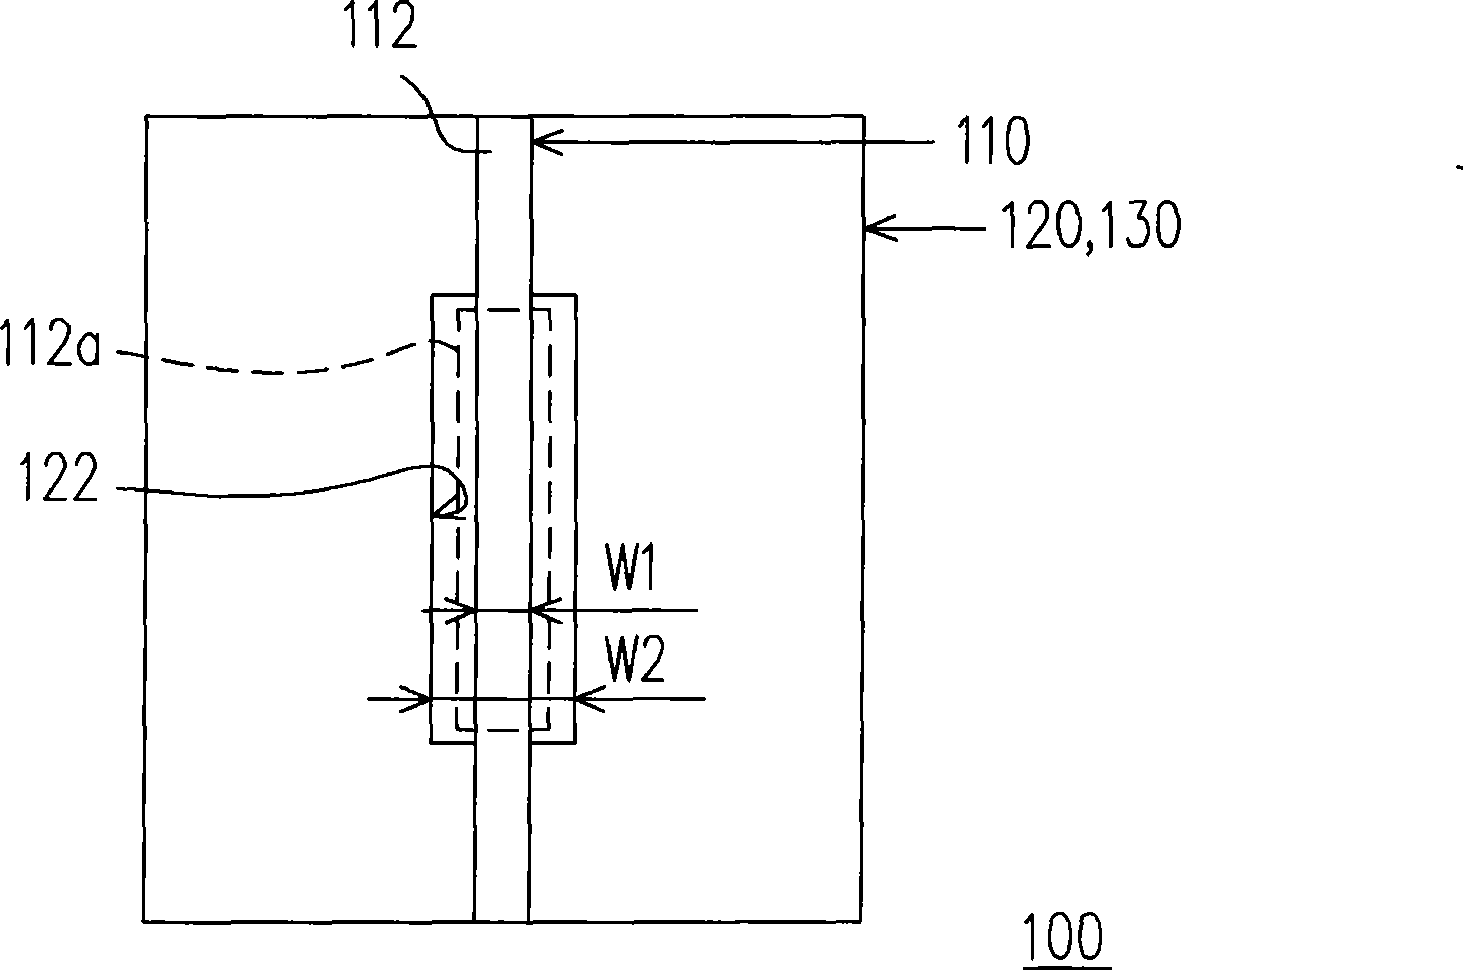 Layout structure of circuit board